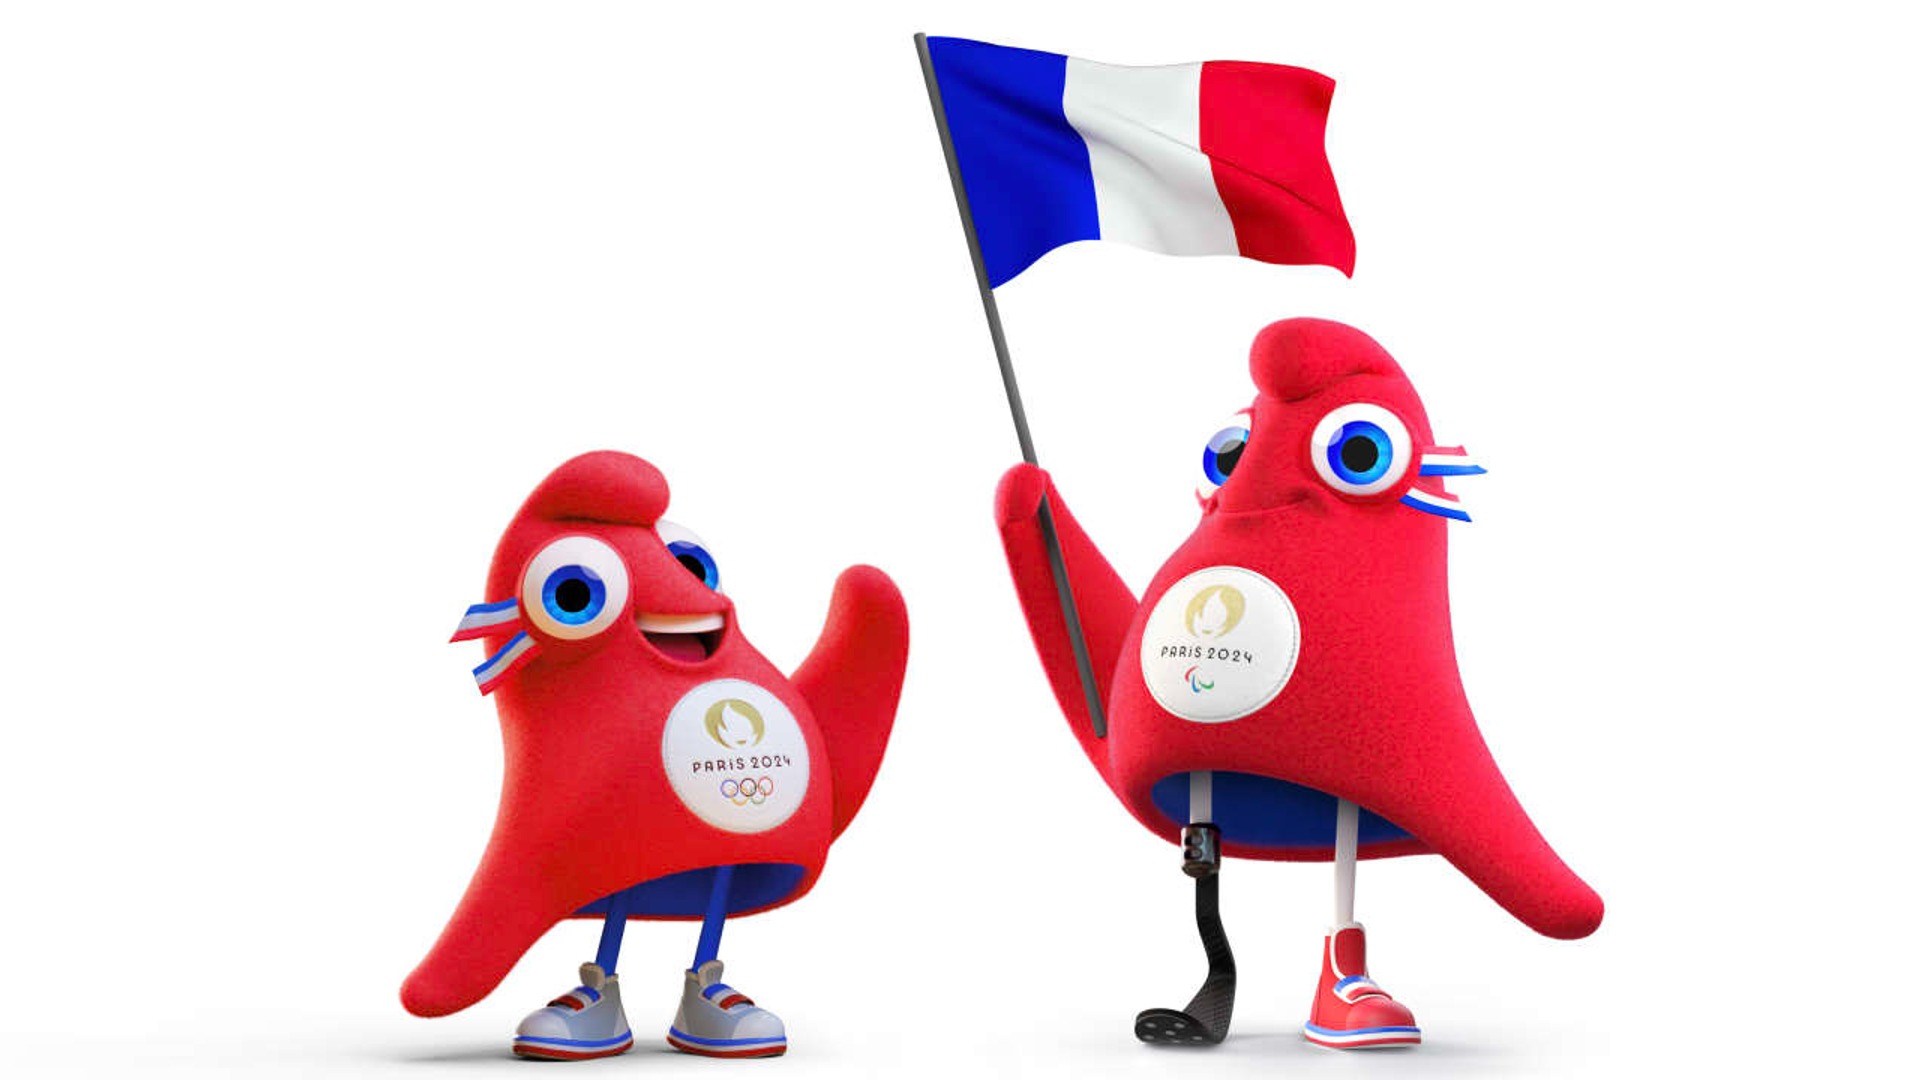 The Official Mascots of Paris Olympics and Paralympics 2024 247 News